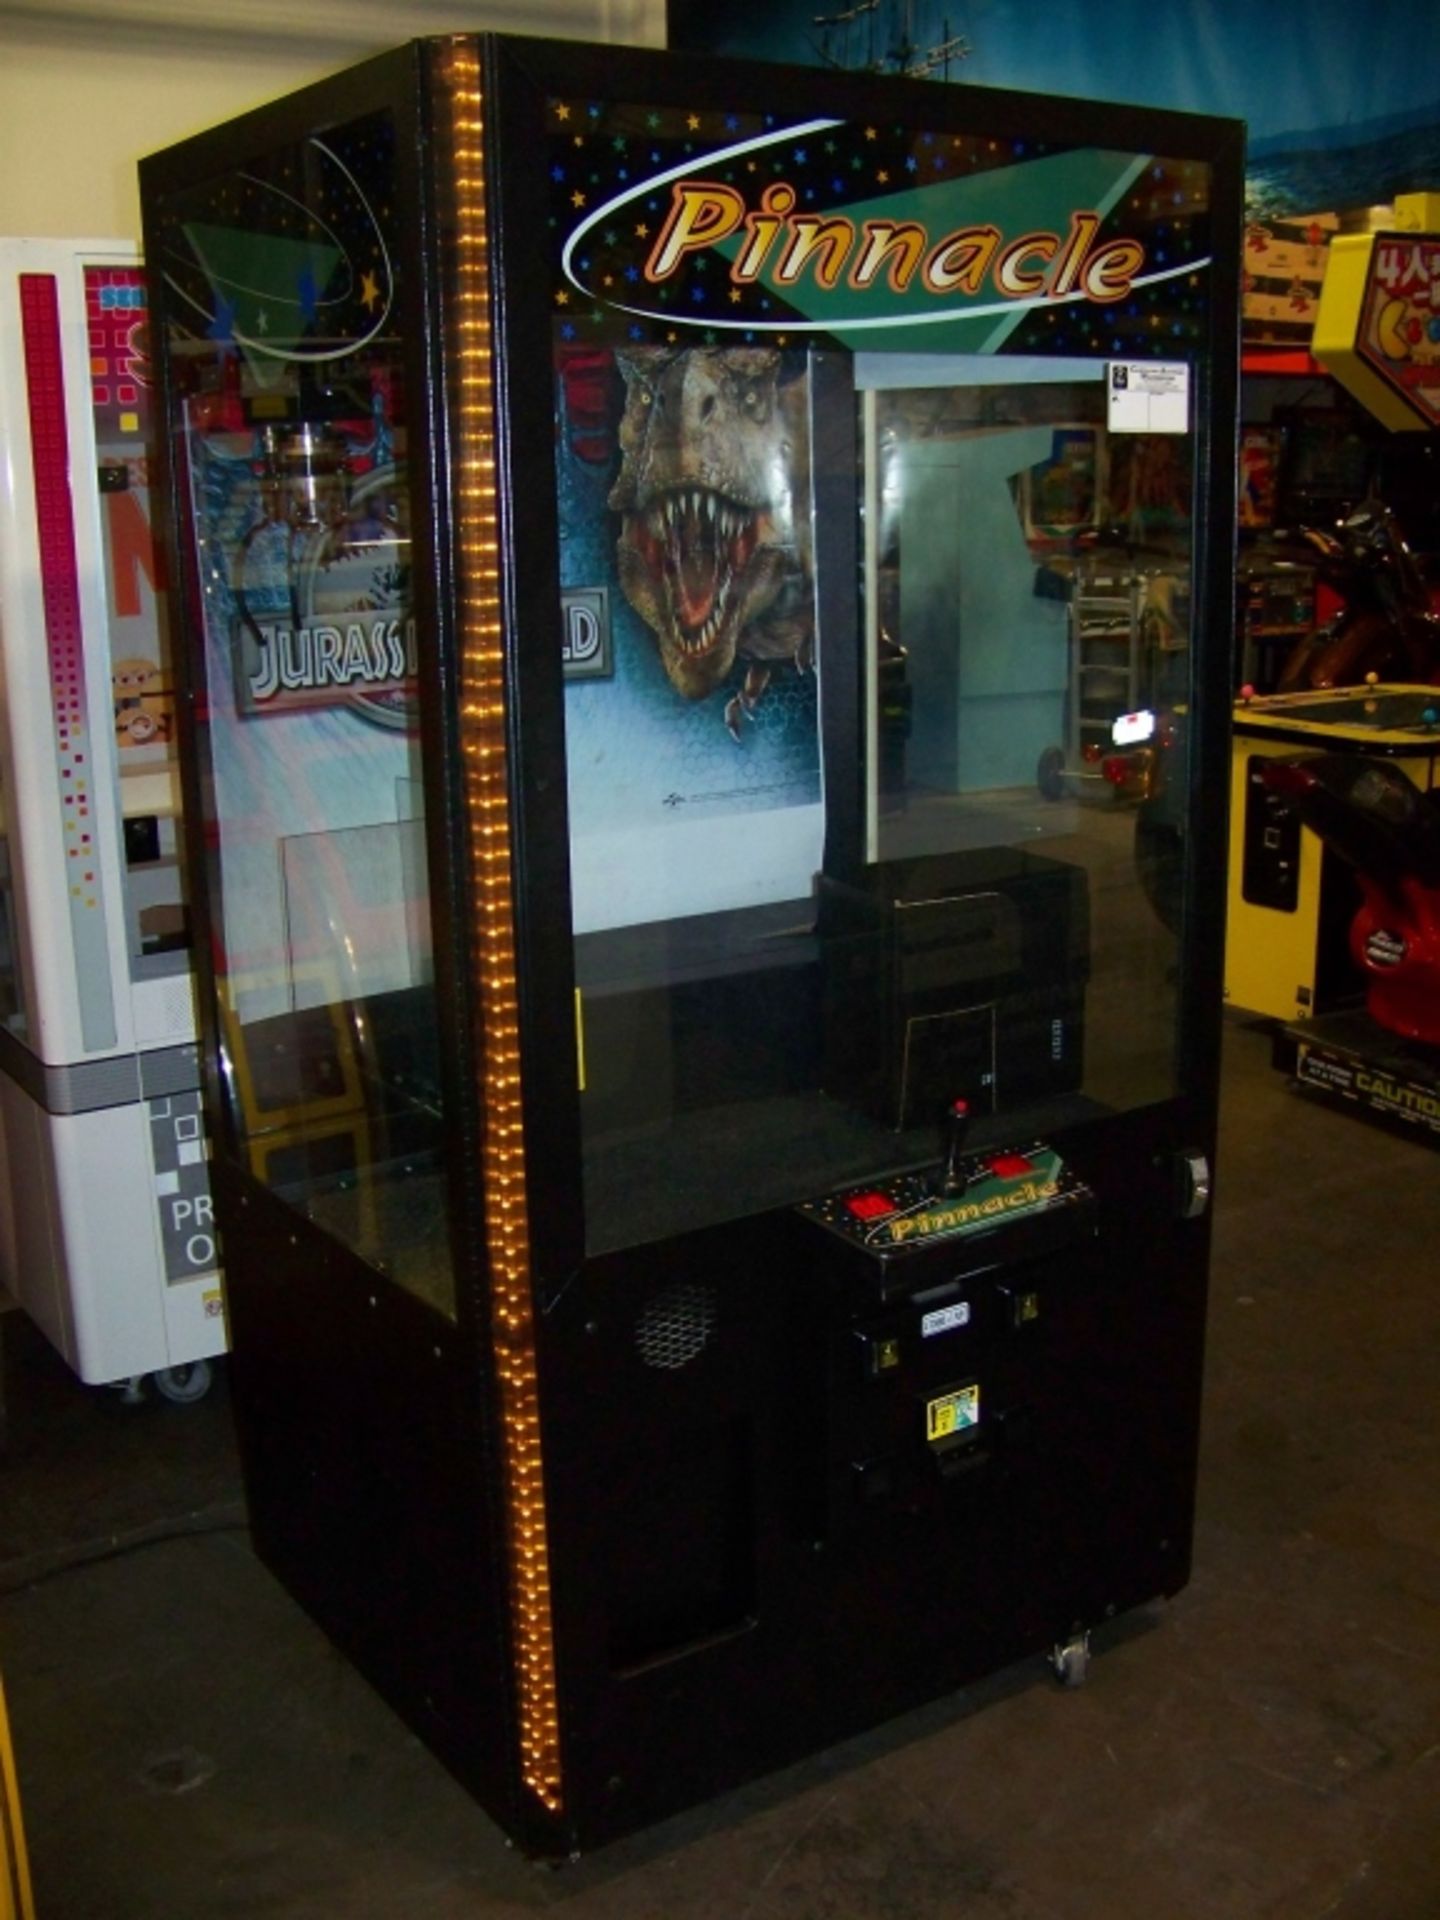 42"" PINNACLE PLUSH CLAW CRANE MACHINE I.C.E. Item is in used condition. Evidence of wear and